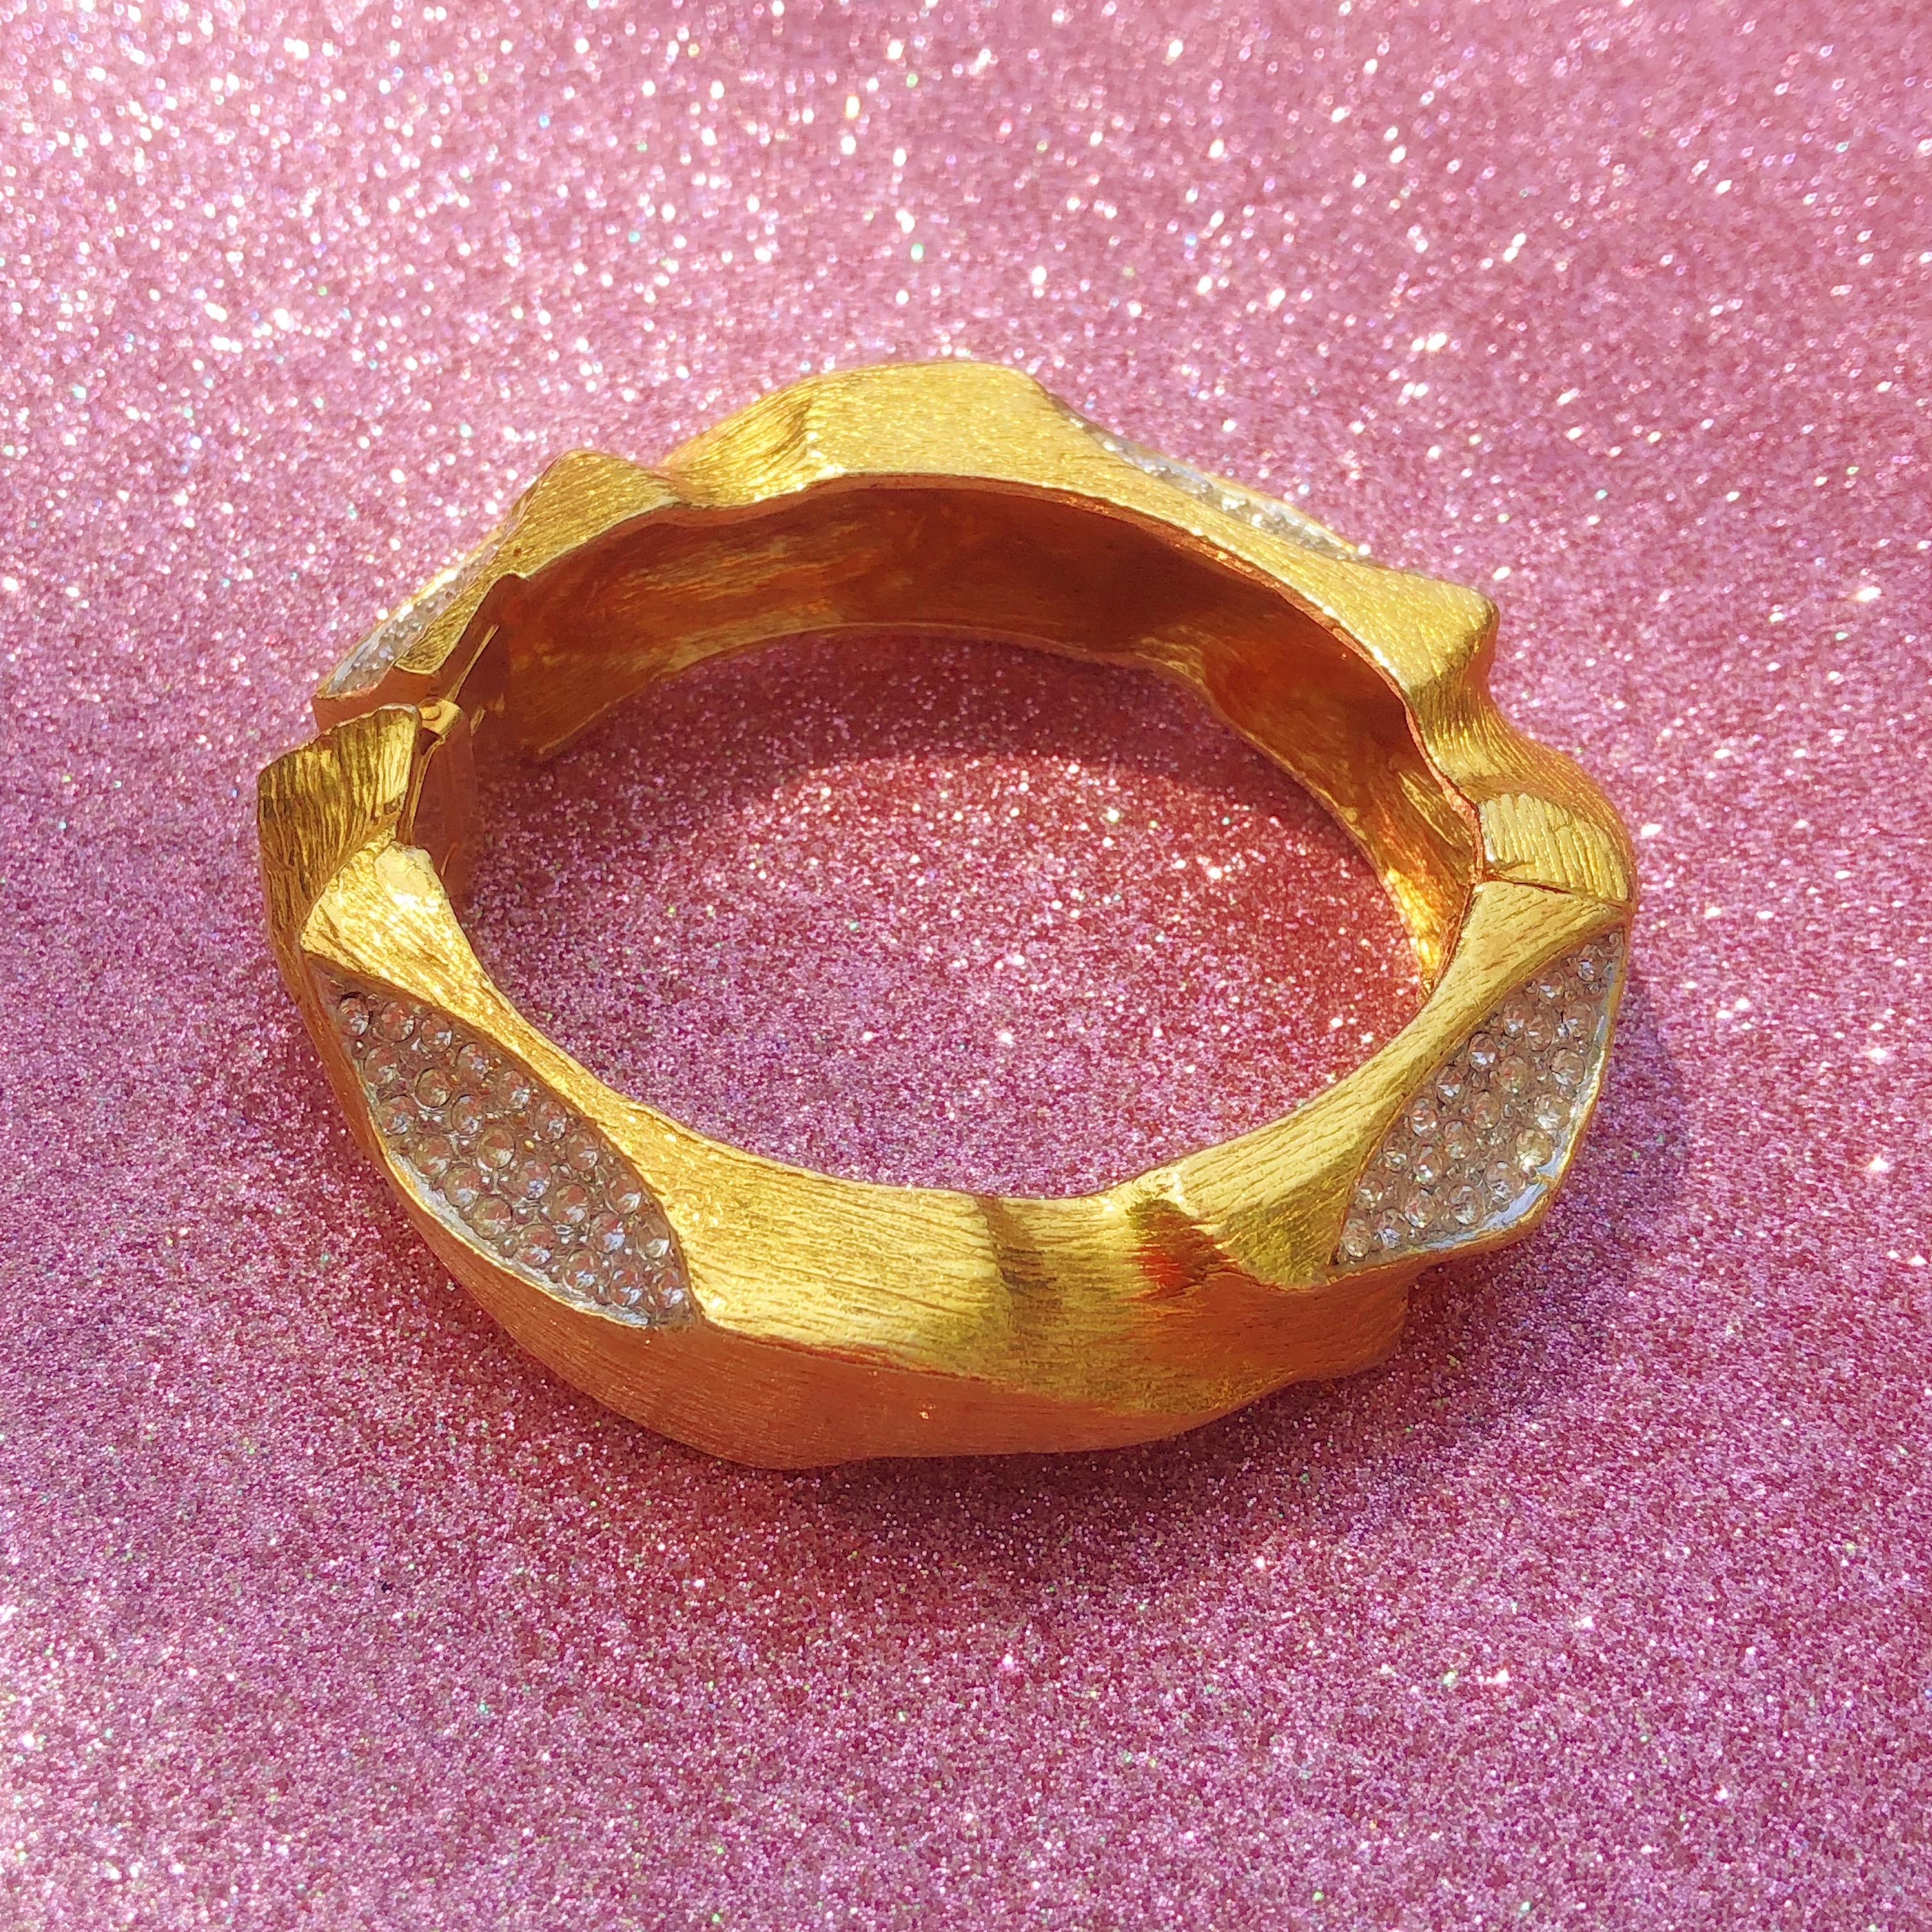 Gorgeous and rare gilded rhinestone pavé chunky clamper bangle bracelet by iconic jewelry brand, Hattie Carnegie. 

In 1918, Hattie Carnegie Inc. was founded, starting with a full-scale clothing line. In 1939, Hattie Carnegie began producing jewelry